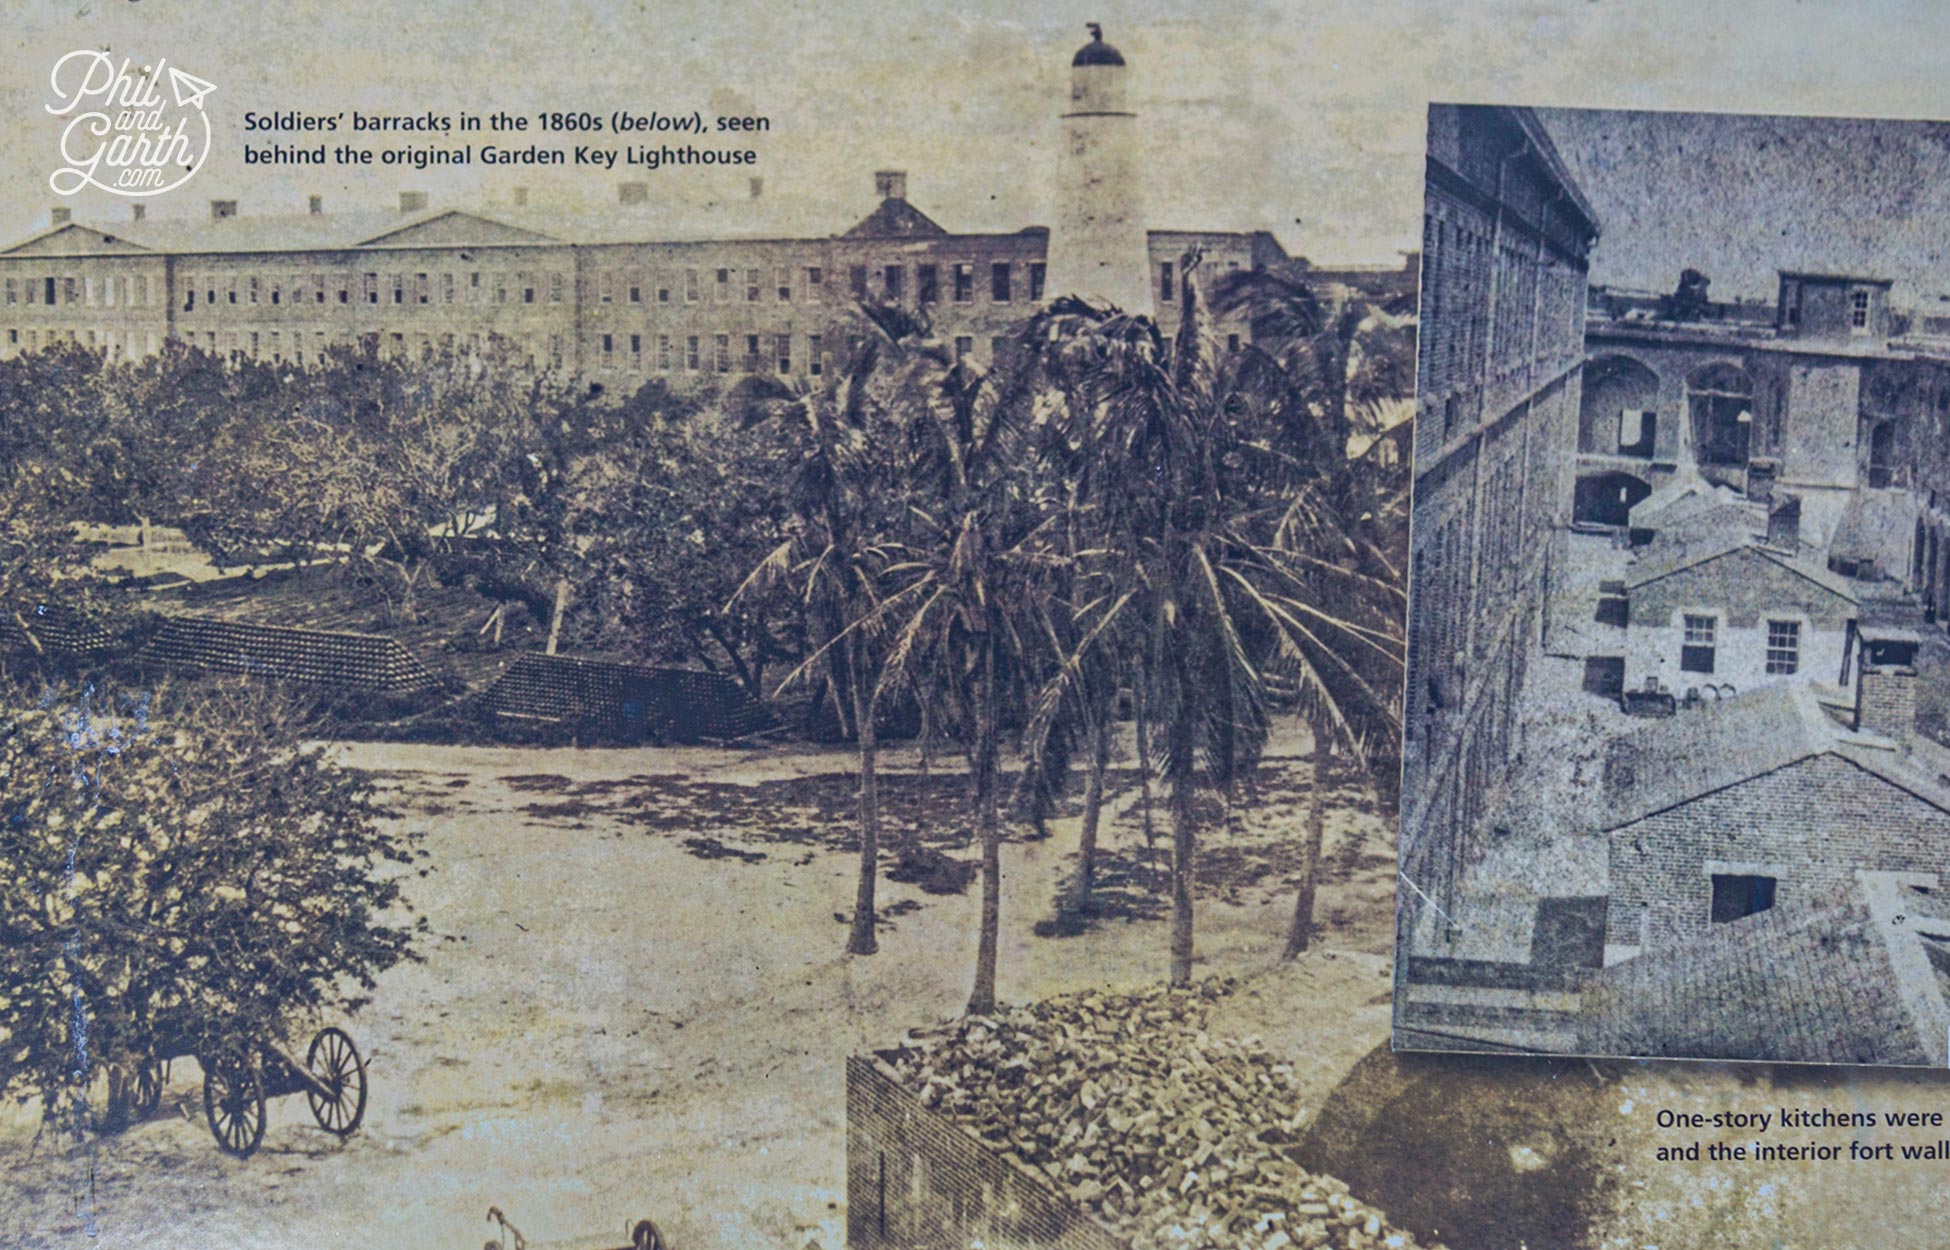 One of the information panels shows old photographs of the barracks before it was knocked down.